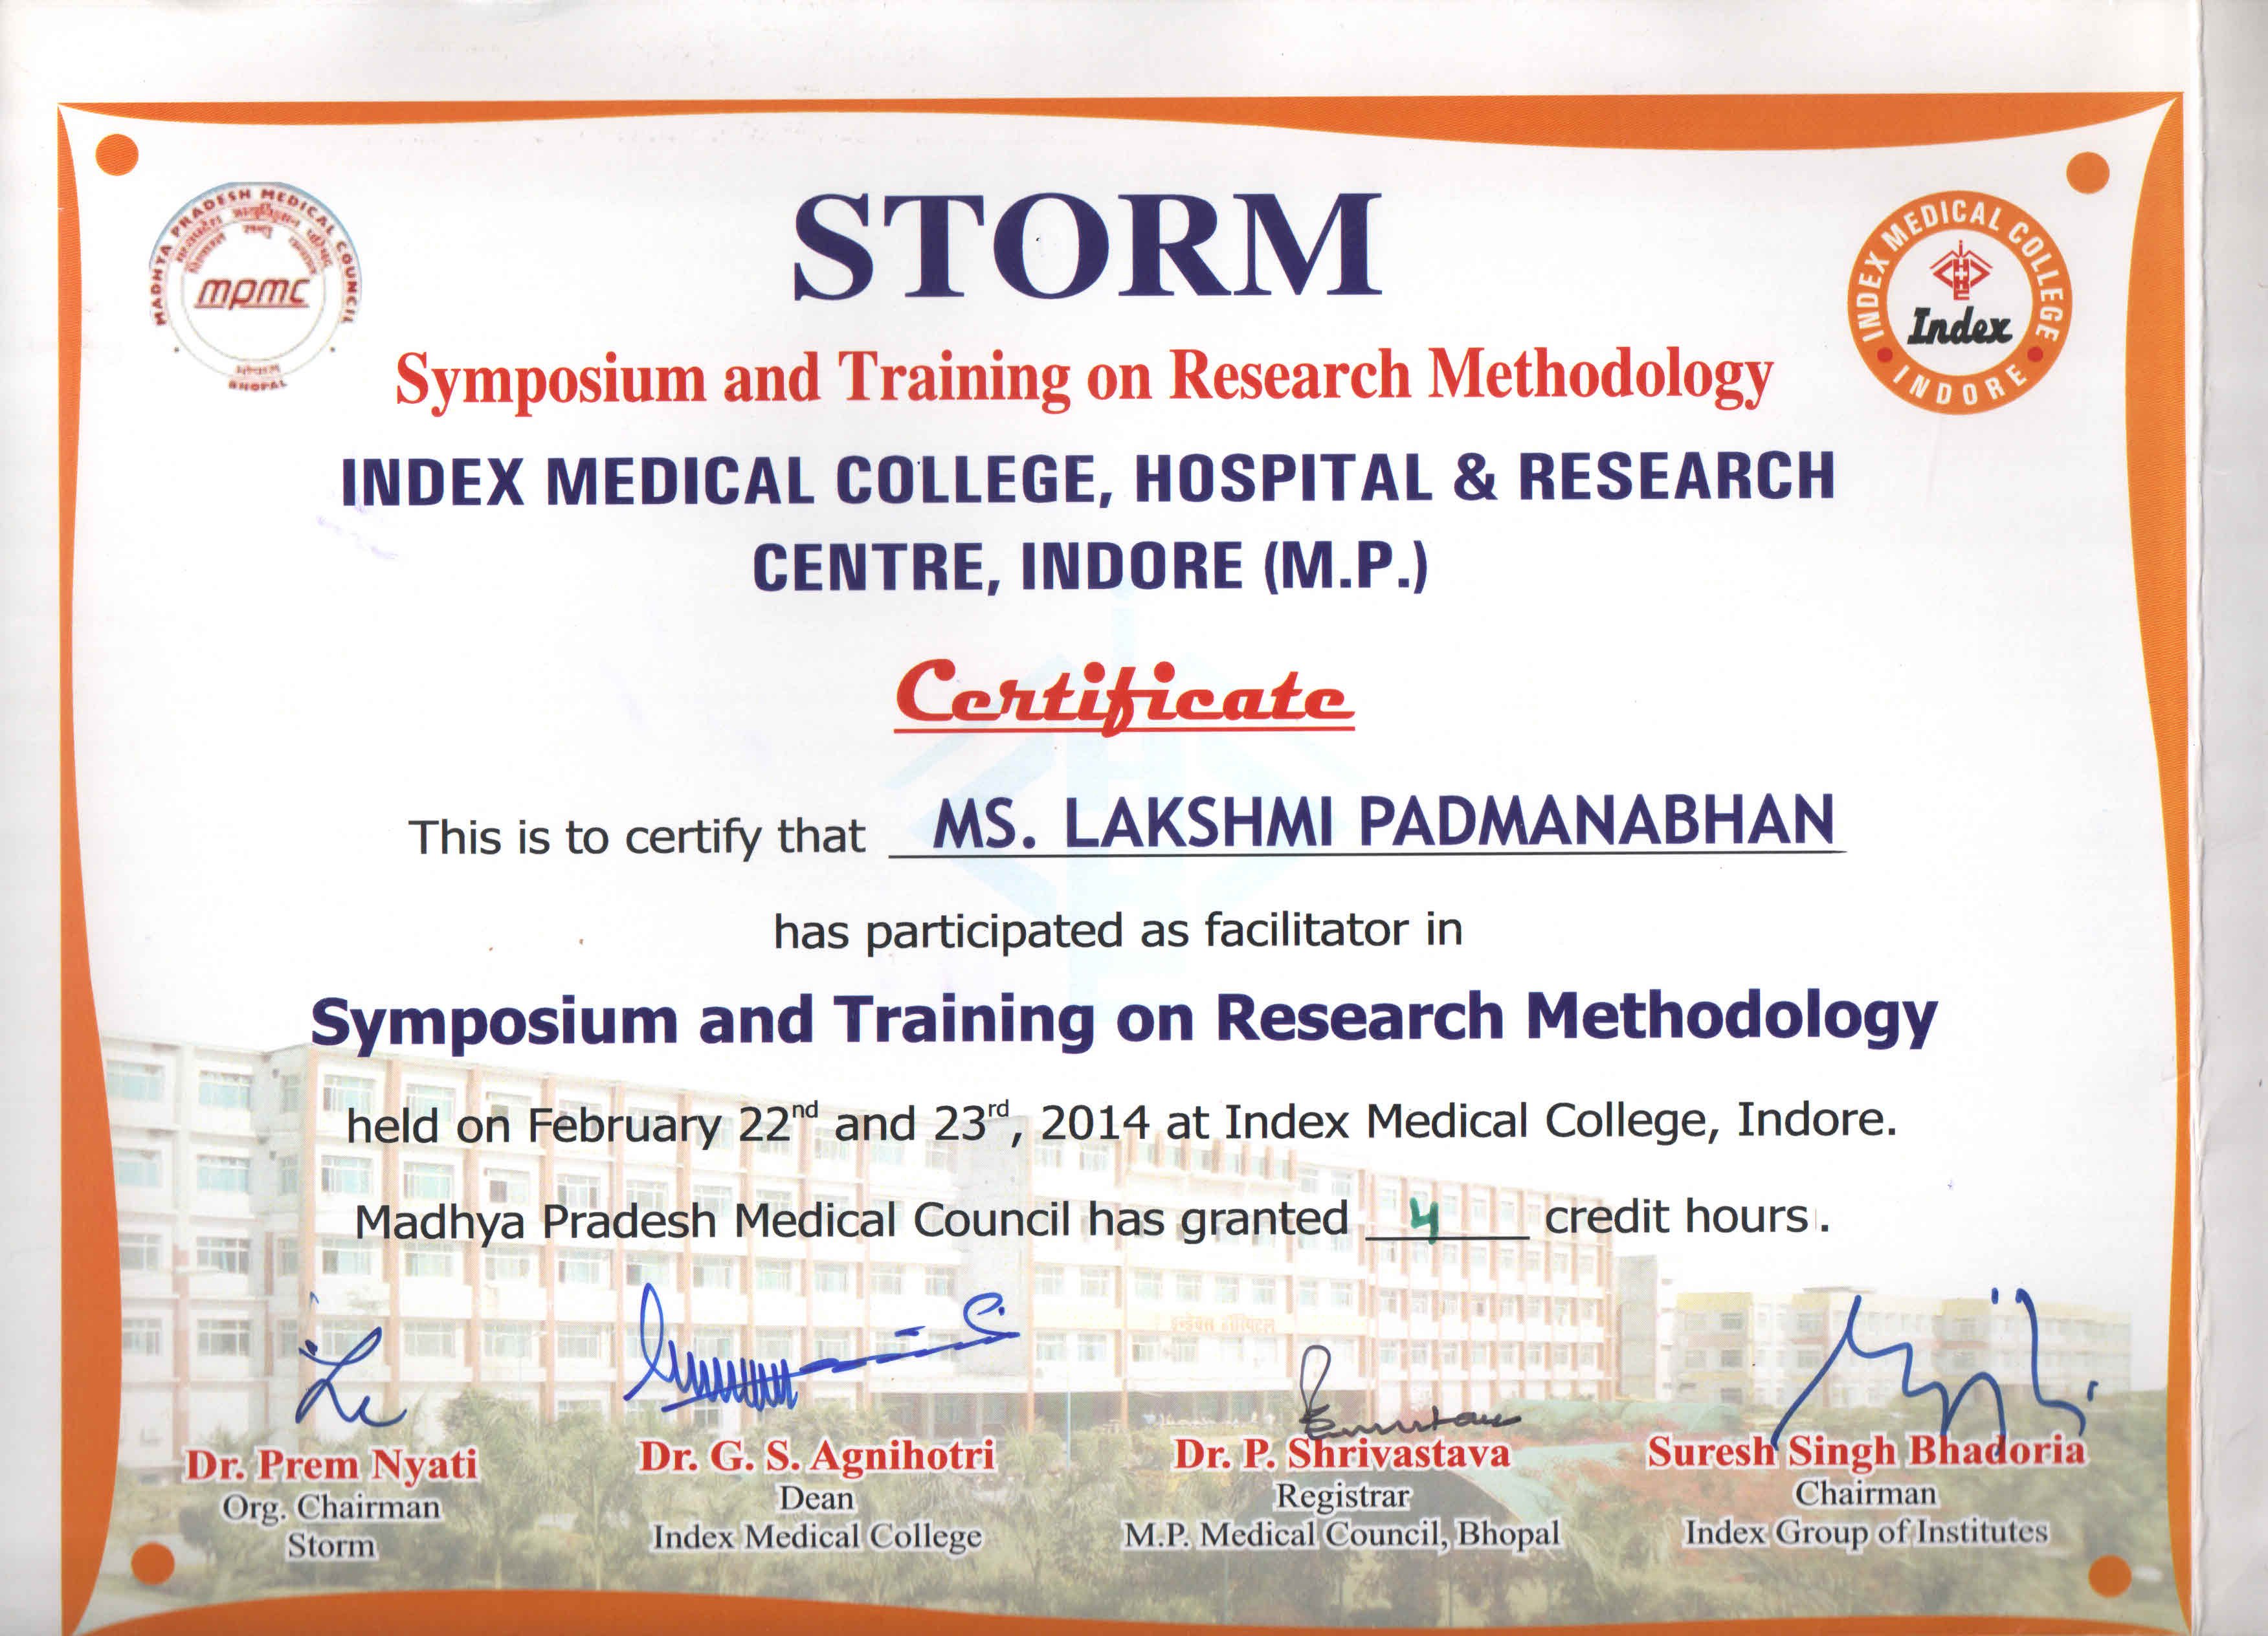 STORM (Symposium and Training on Research Methodology)-Lecture